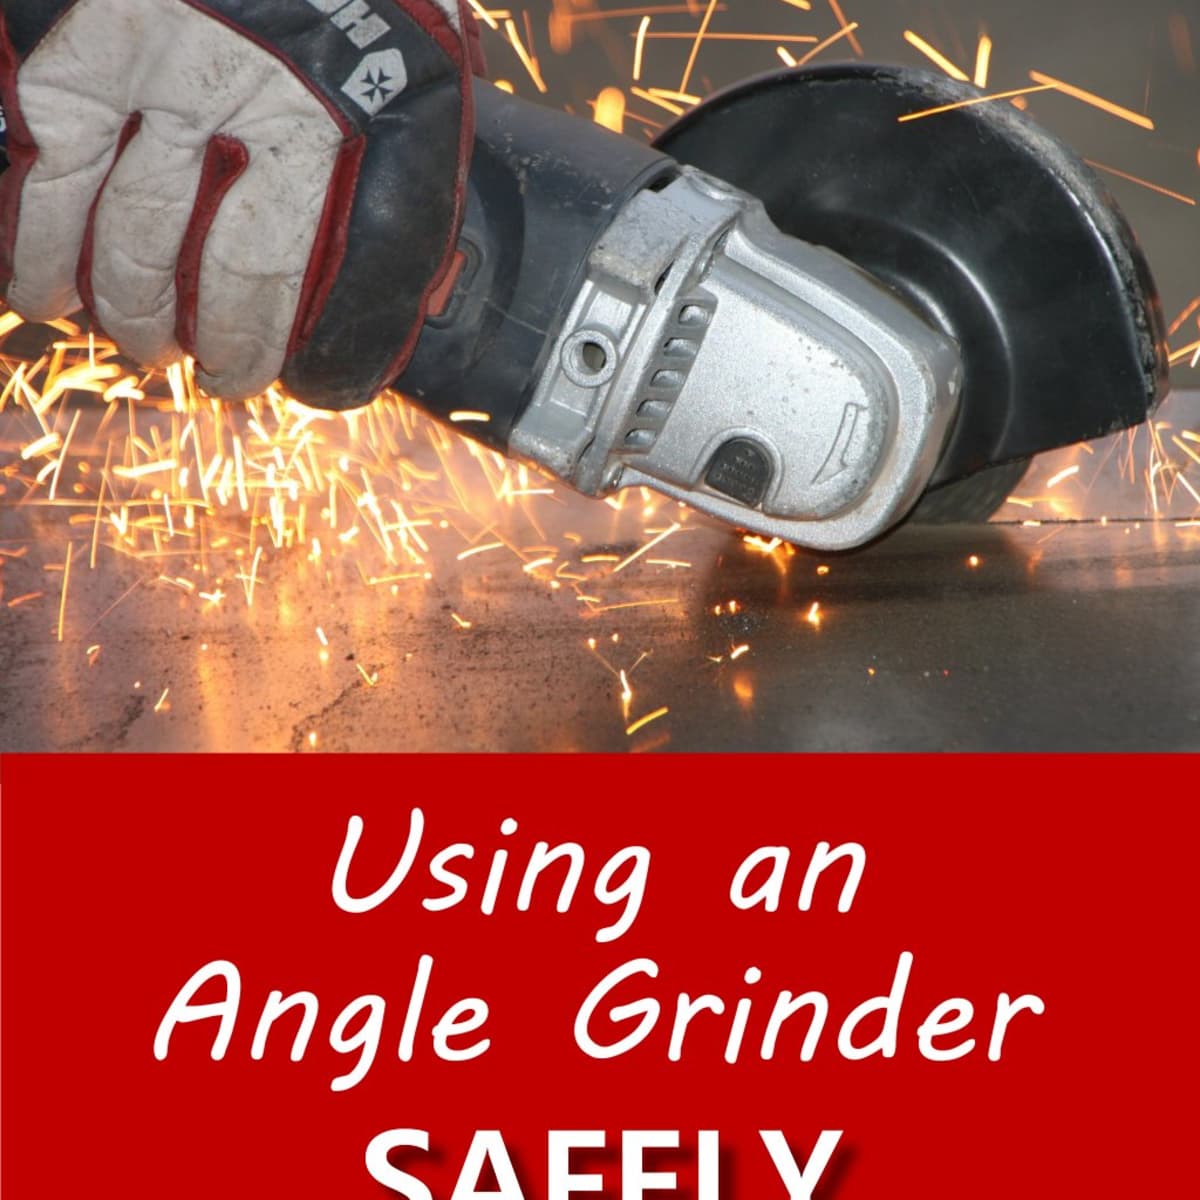 Tool Tear Down: Angle Grinder, How to Disassemble Your Grinder